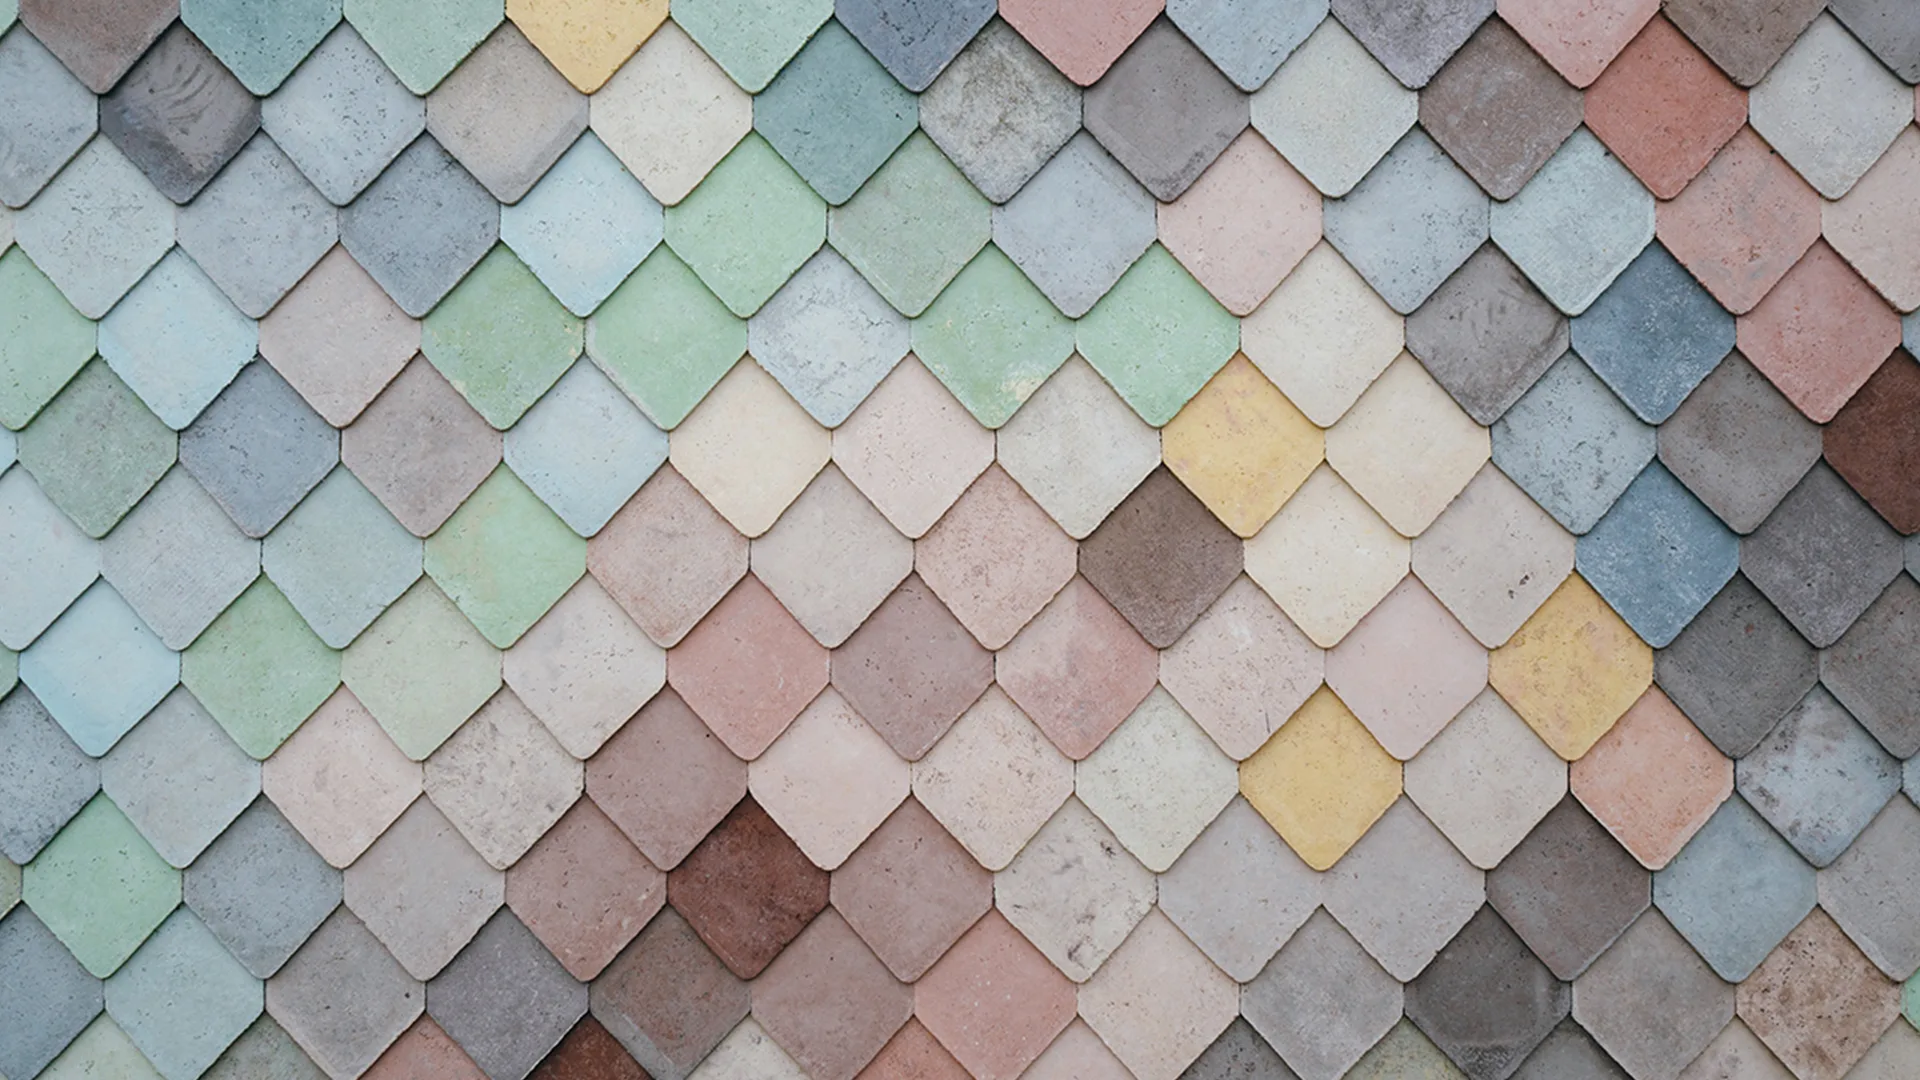 A wall of pastels tiles